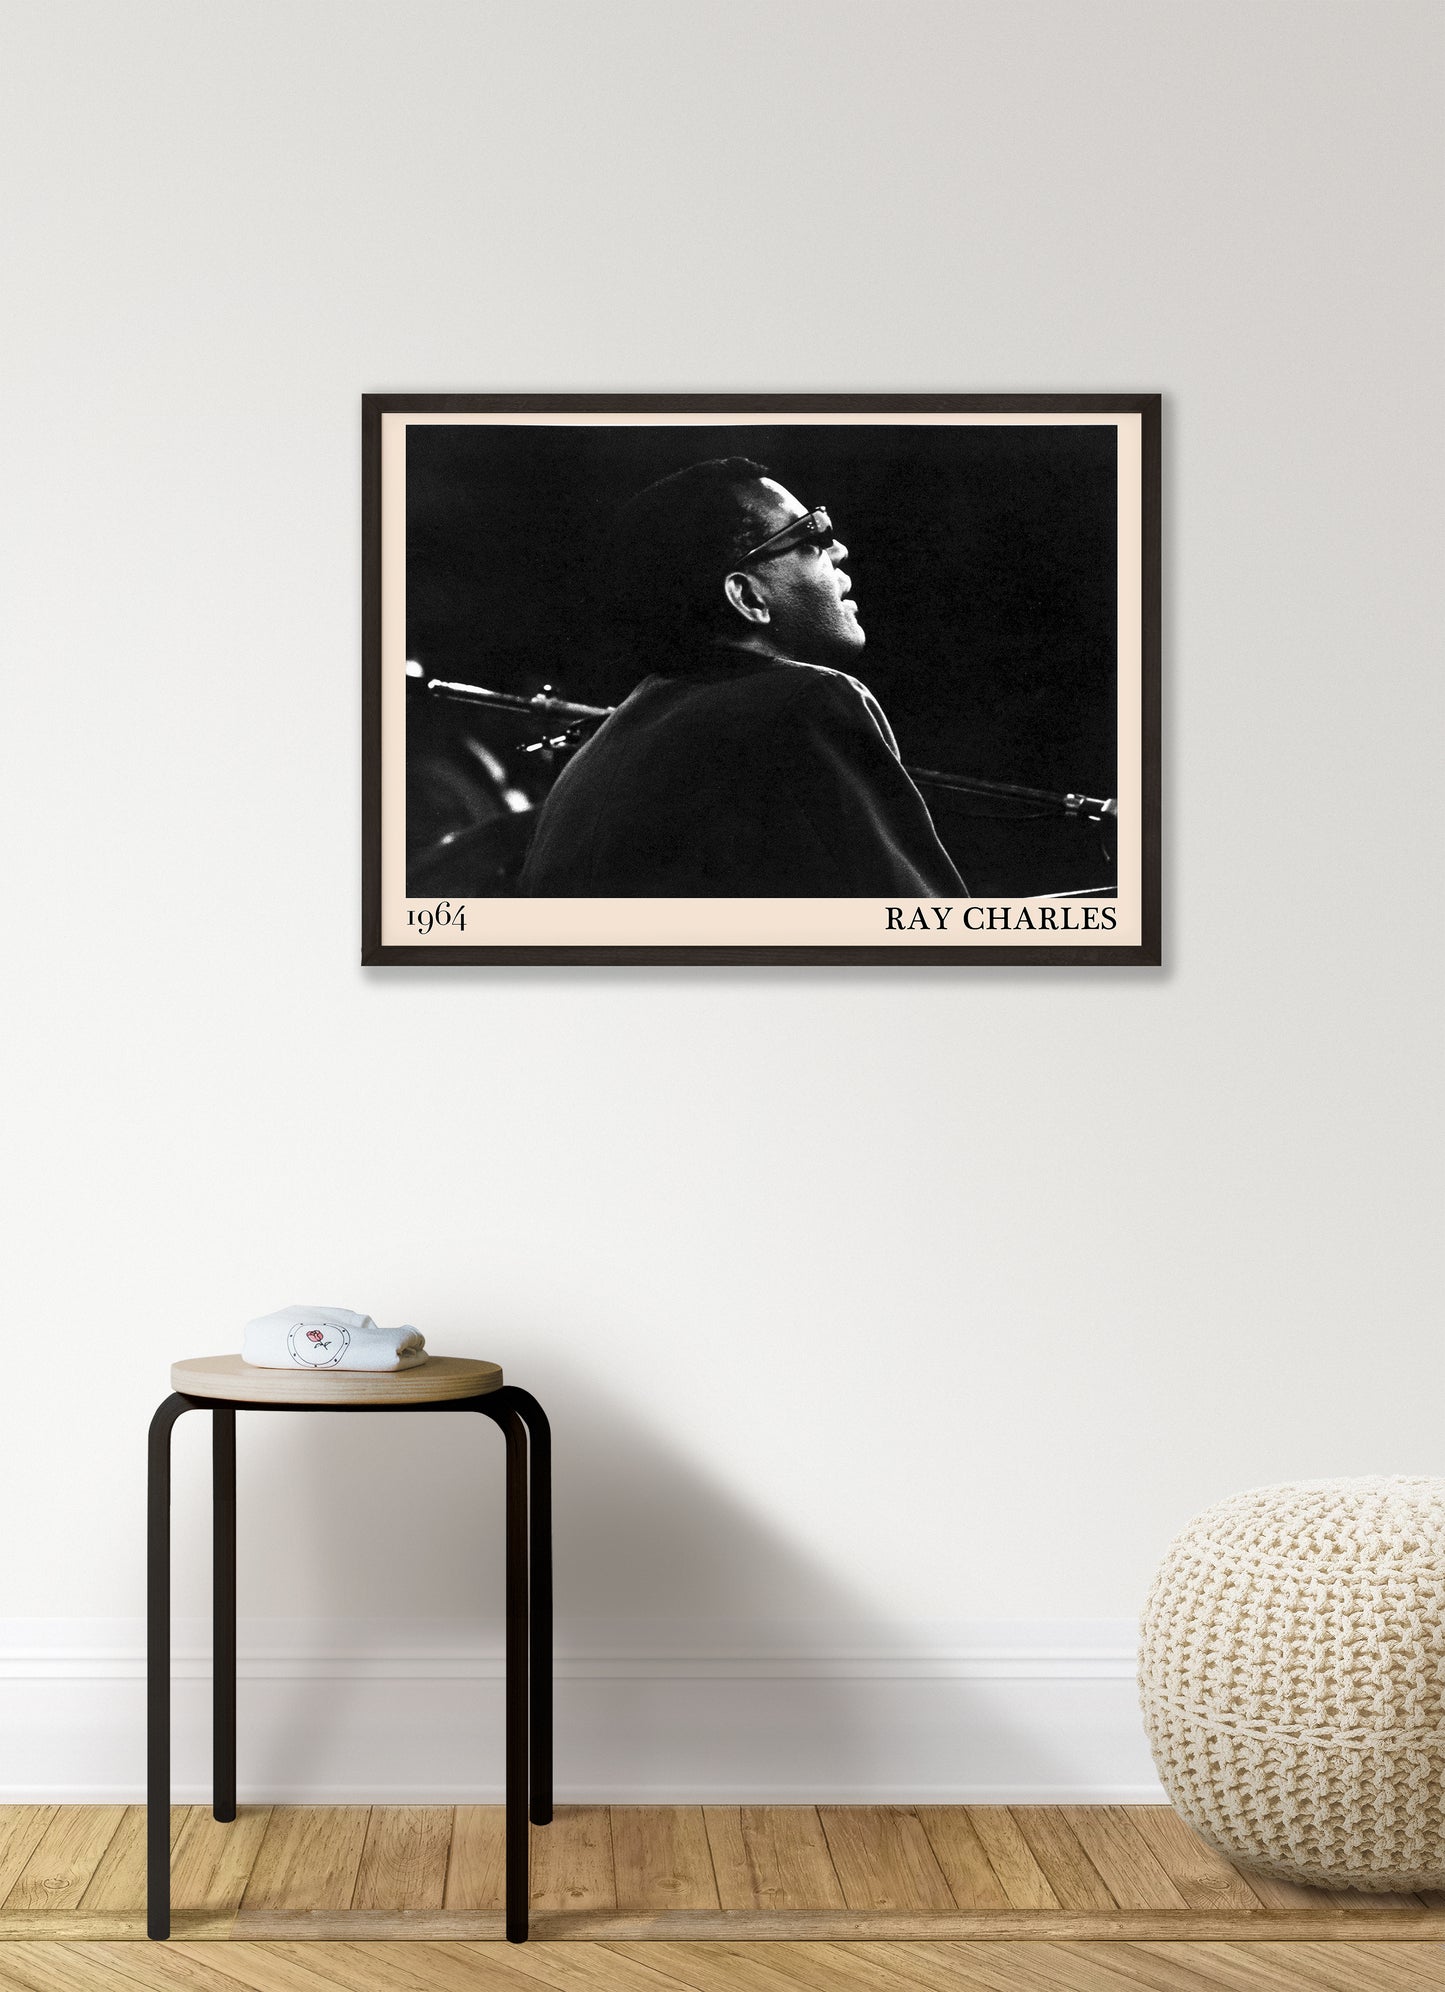  1964 photograph of blues legend Ray Charles, transformed into a retro black-framed poster hanging on a white living room wall